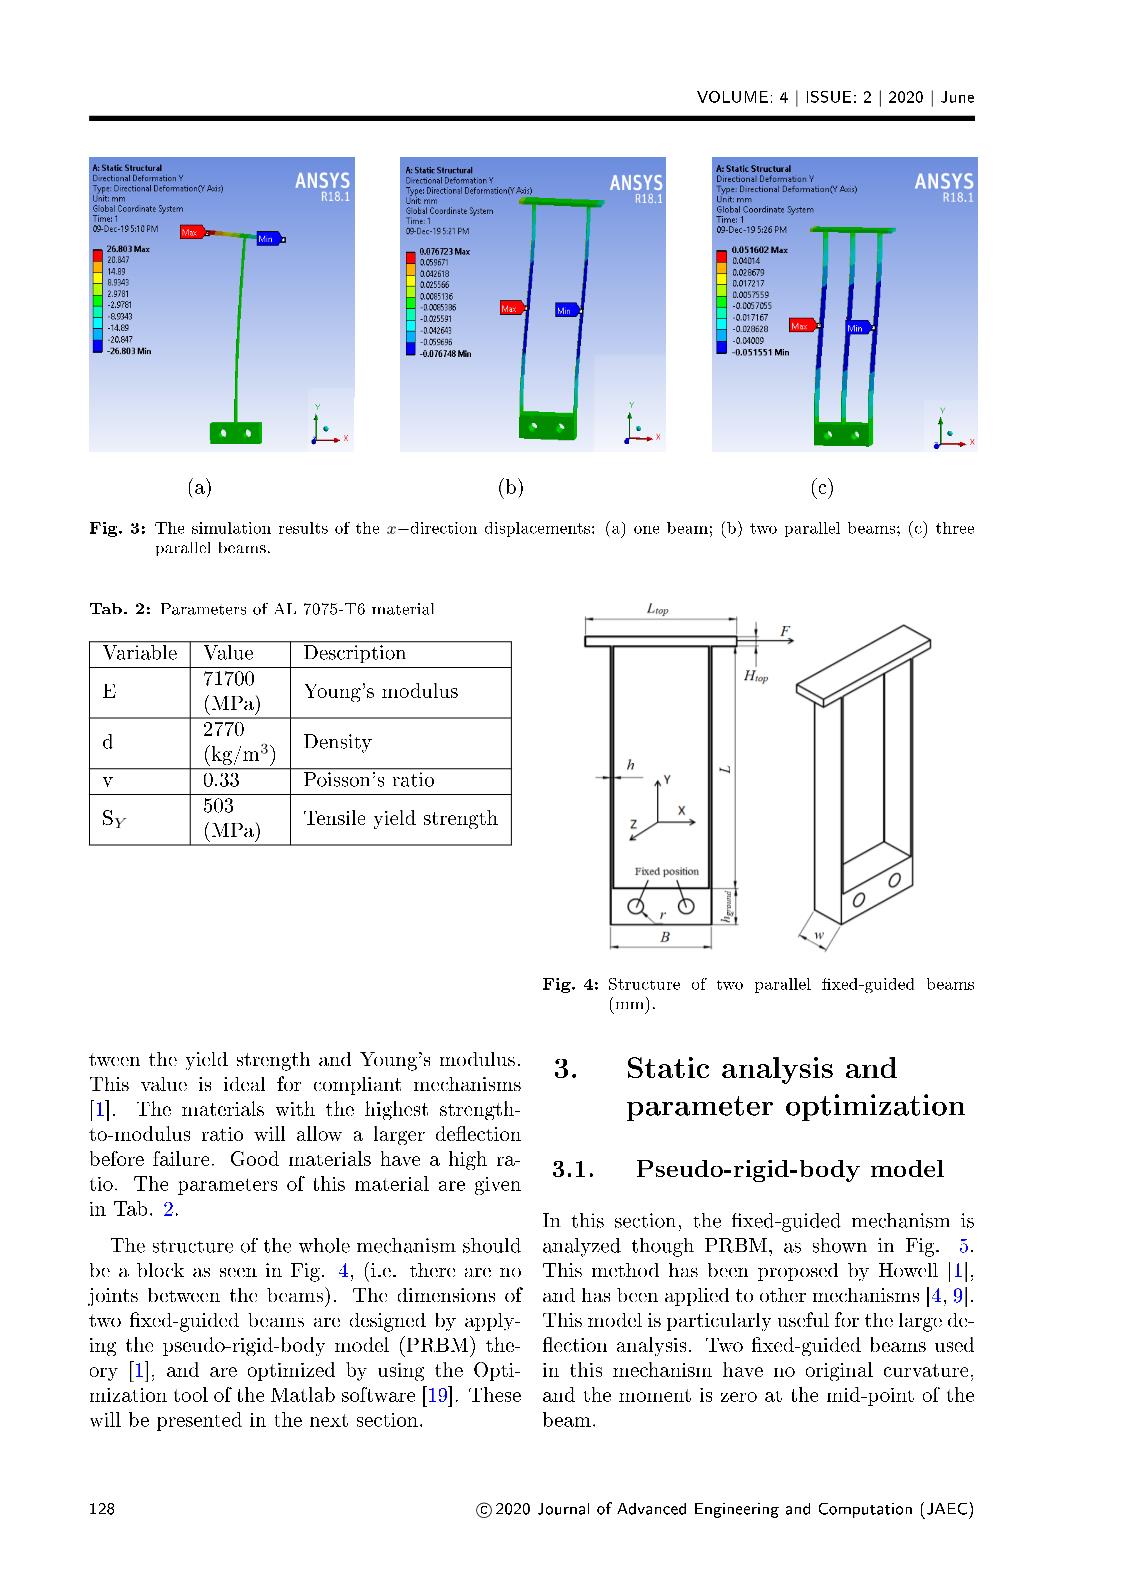 Statics analysis and optimization design for a fixed - guided beam flexure trang 4